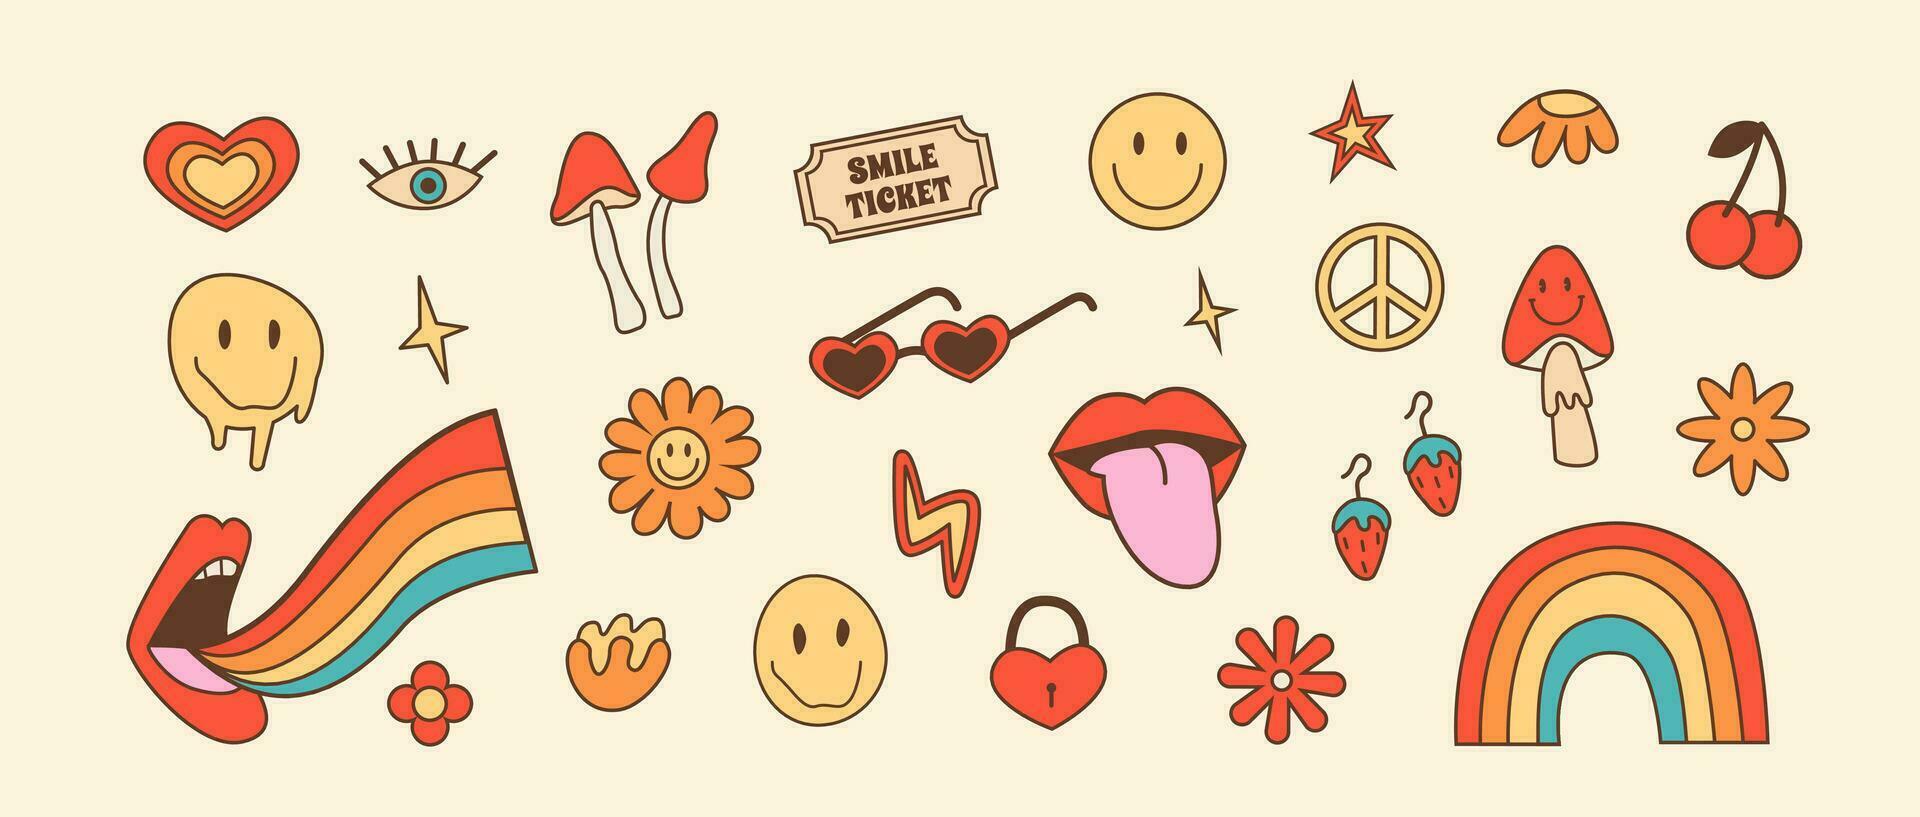 Retro set of stickers with 70s 80s style elements. Cartoon daisy flower with smiley face. Old fashioned roller skate, music devices and hand gestures. Hippie vintage outline color icons. Vector. vector